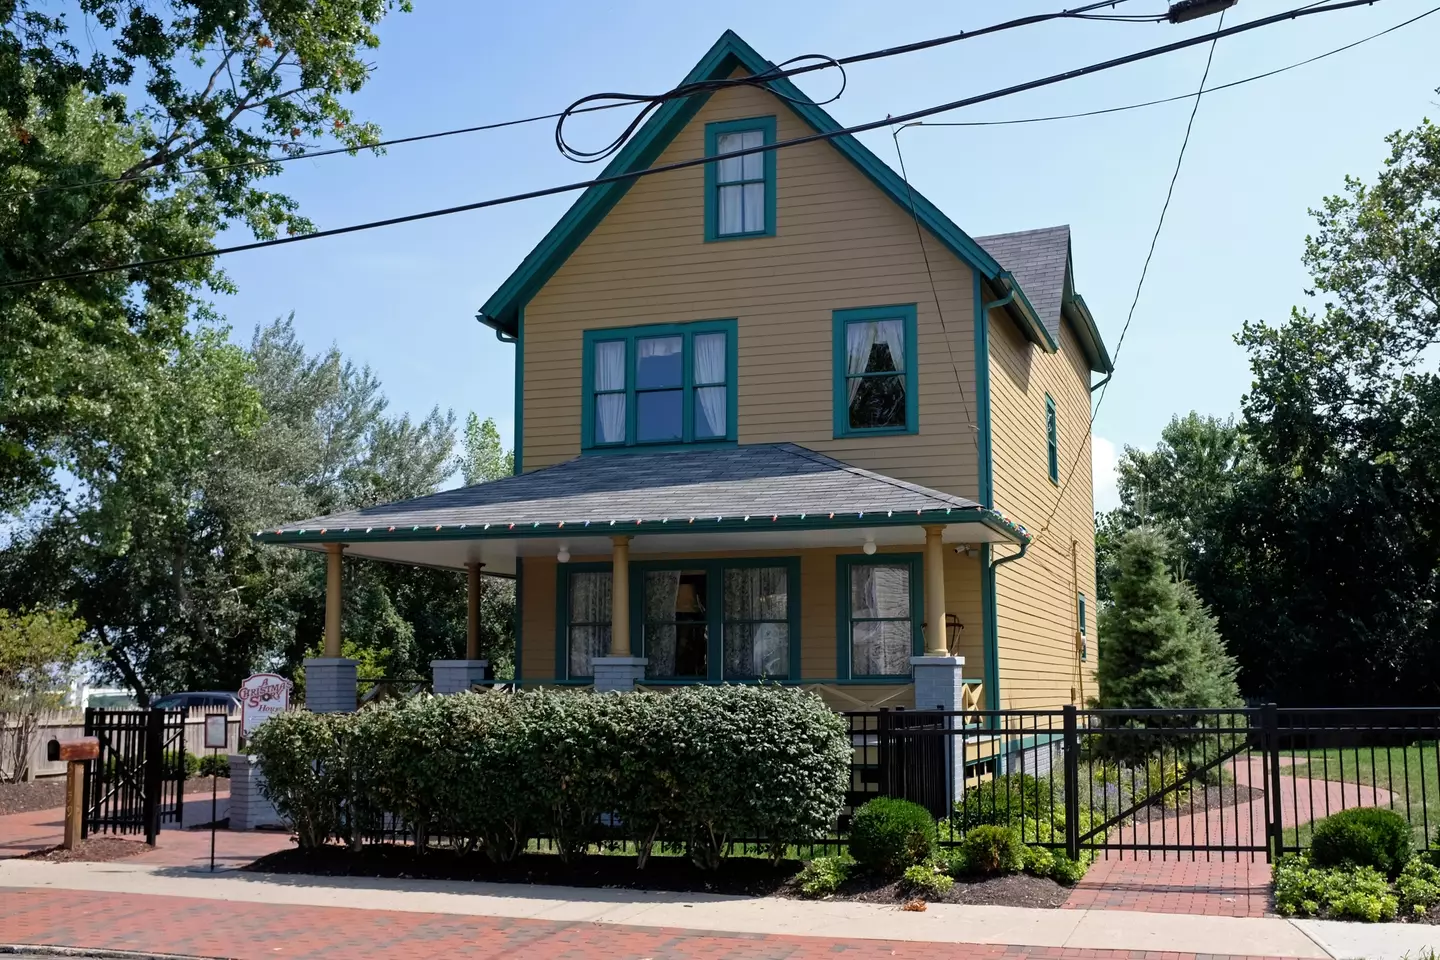 The house from A Christmas Story is a designated Cleveland landmark.